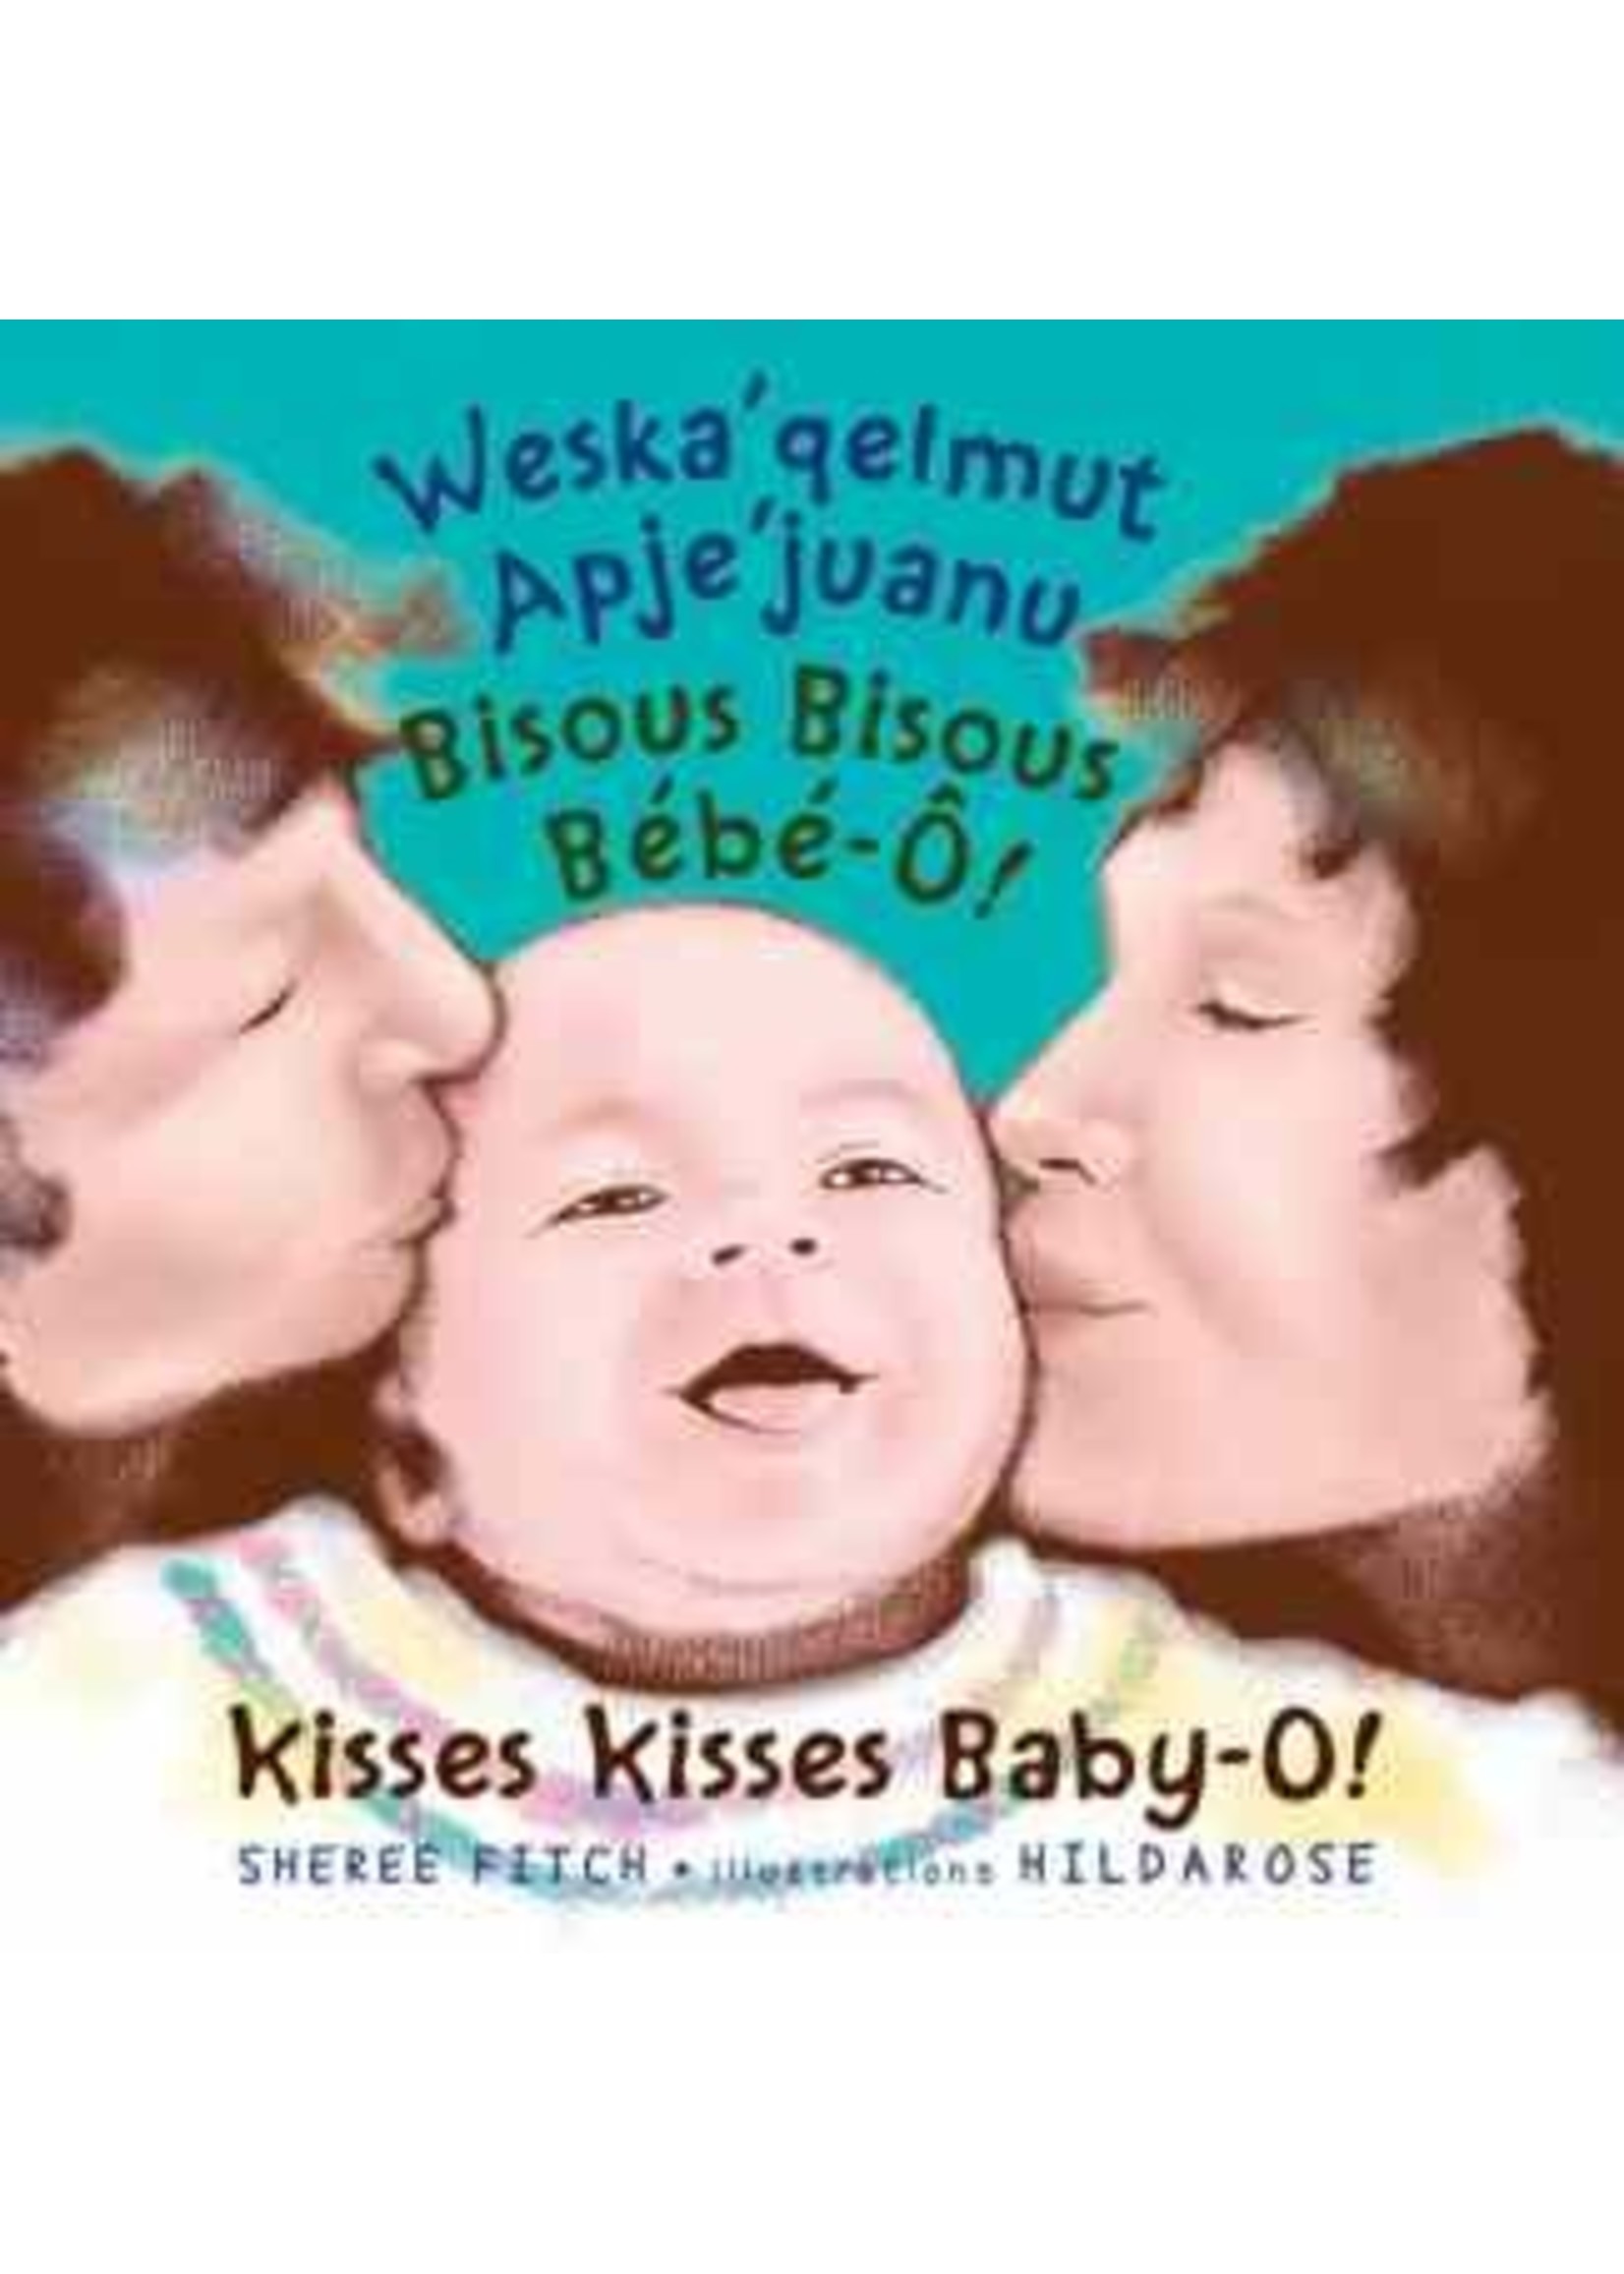 Kisses Kisses, Baby-O!: Trilingual Edition by Sheree Fitch